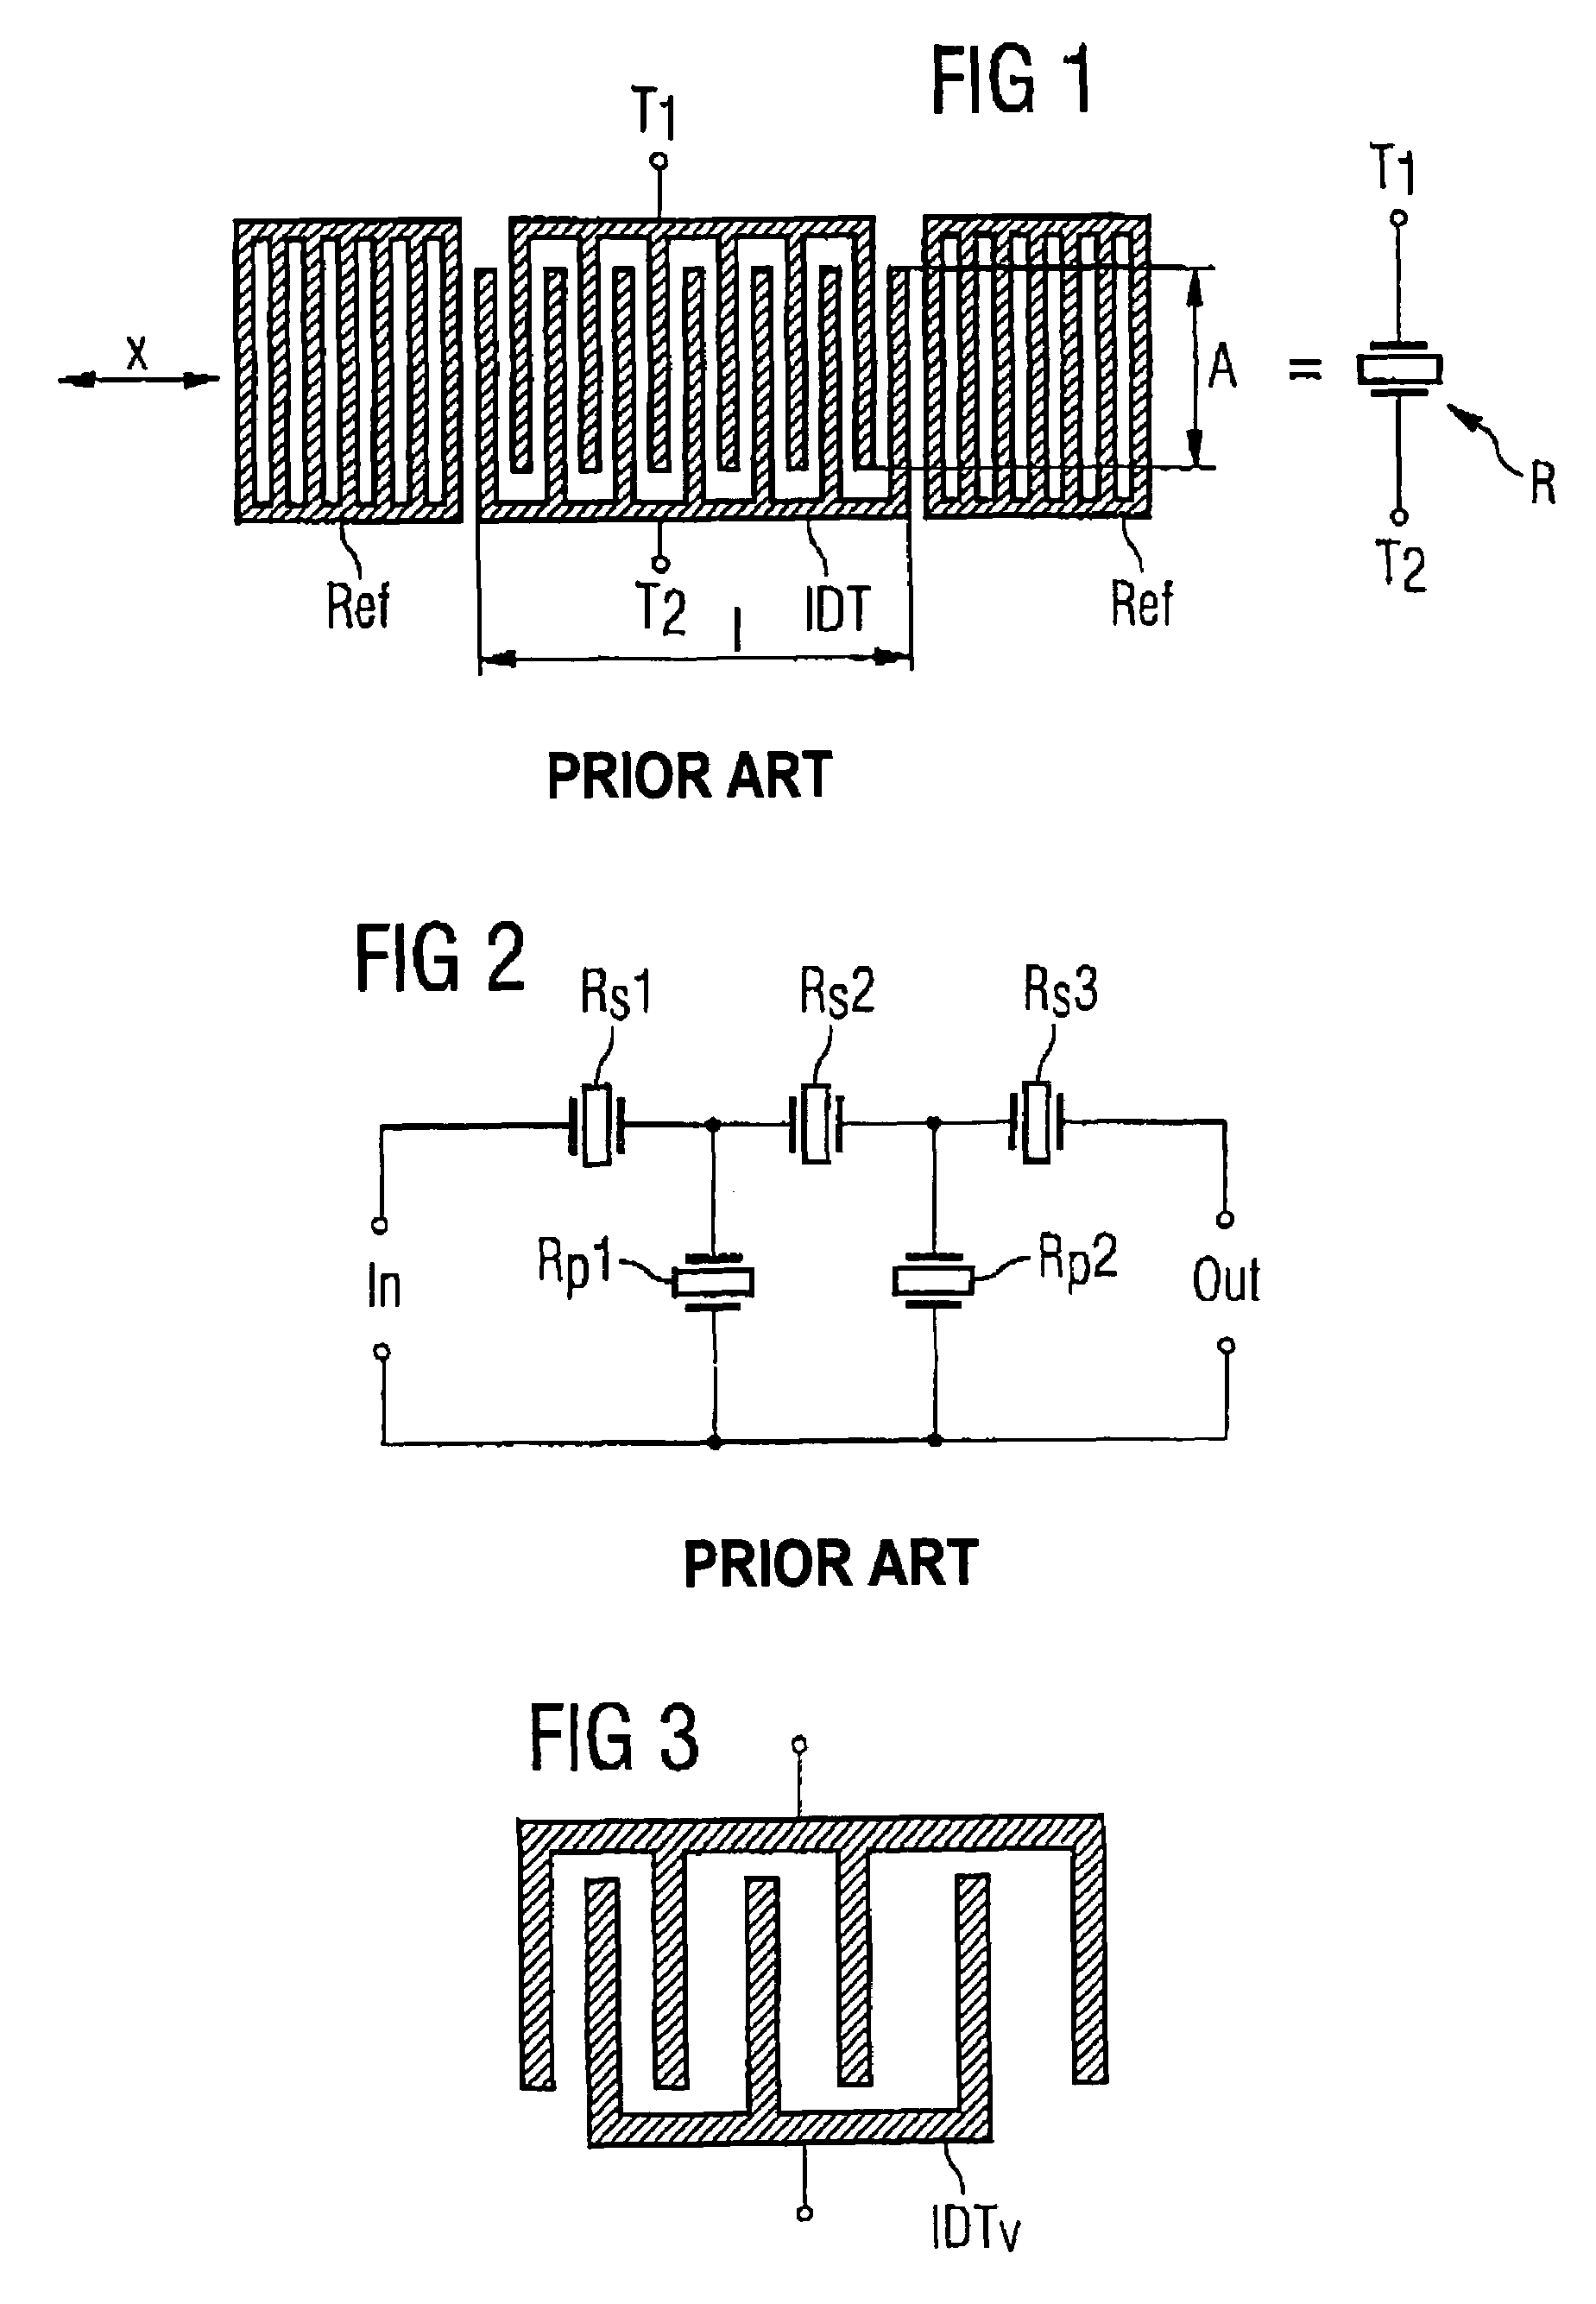 Transducer structure that operates with acoustic waves